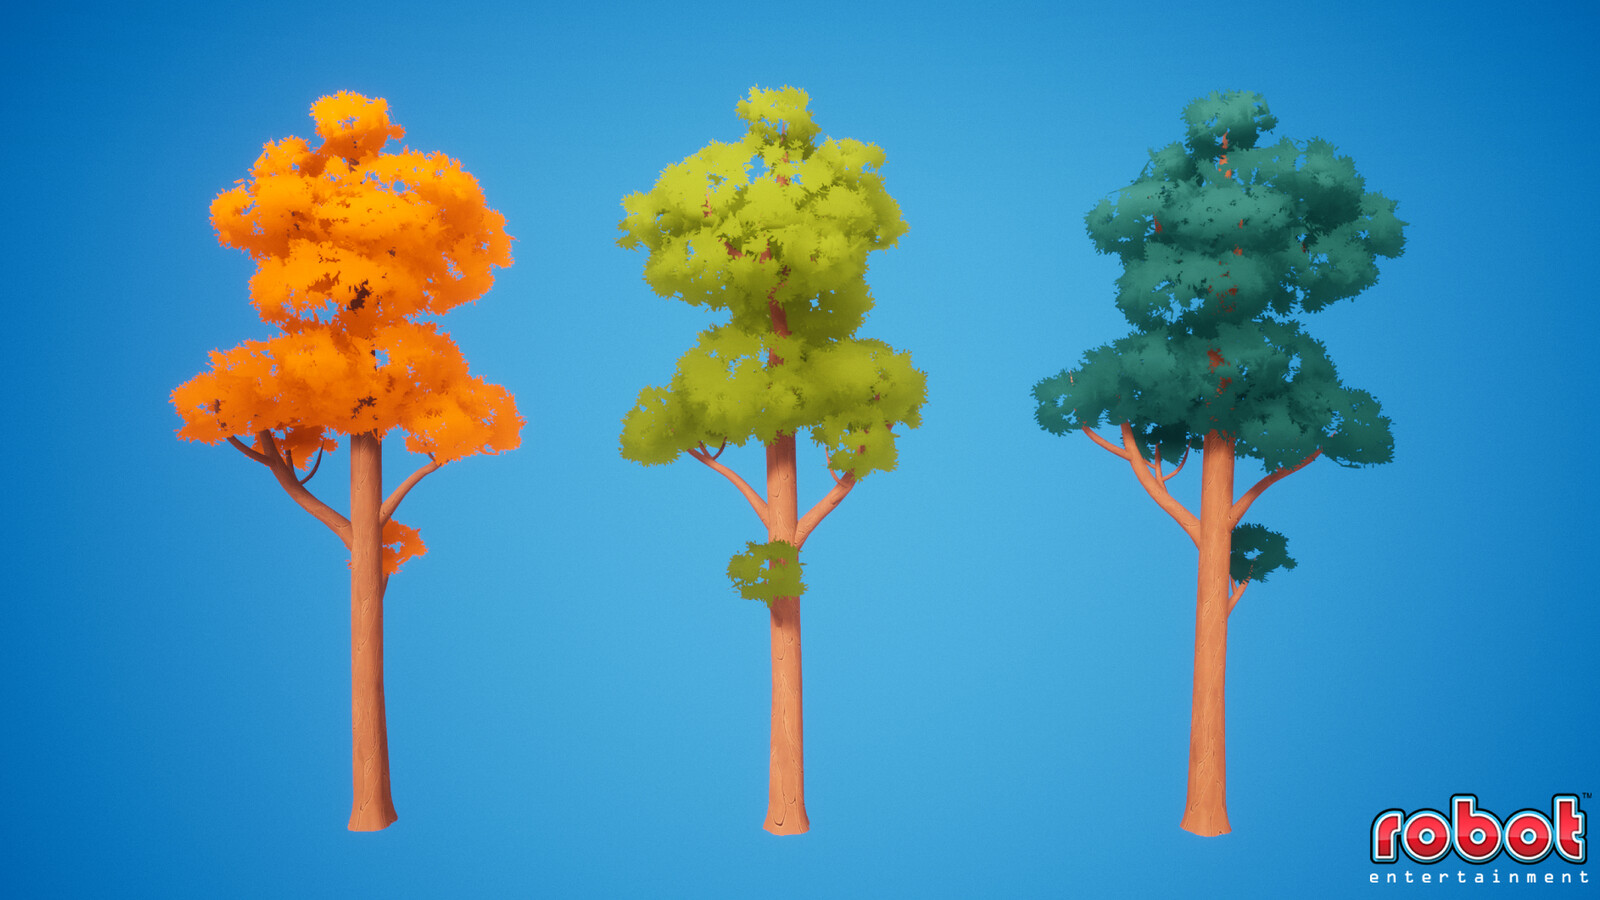 Stylized tree models, created in 3ds Max and Substance Designer.  Shown in UE4.